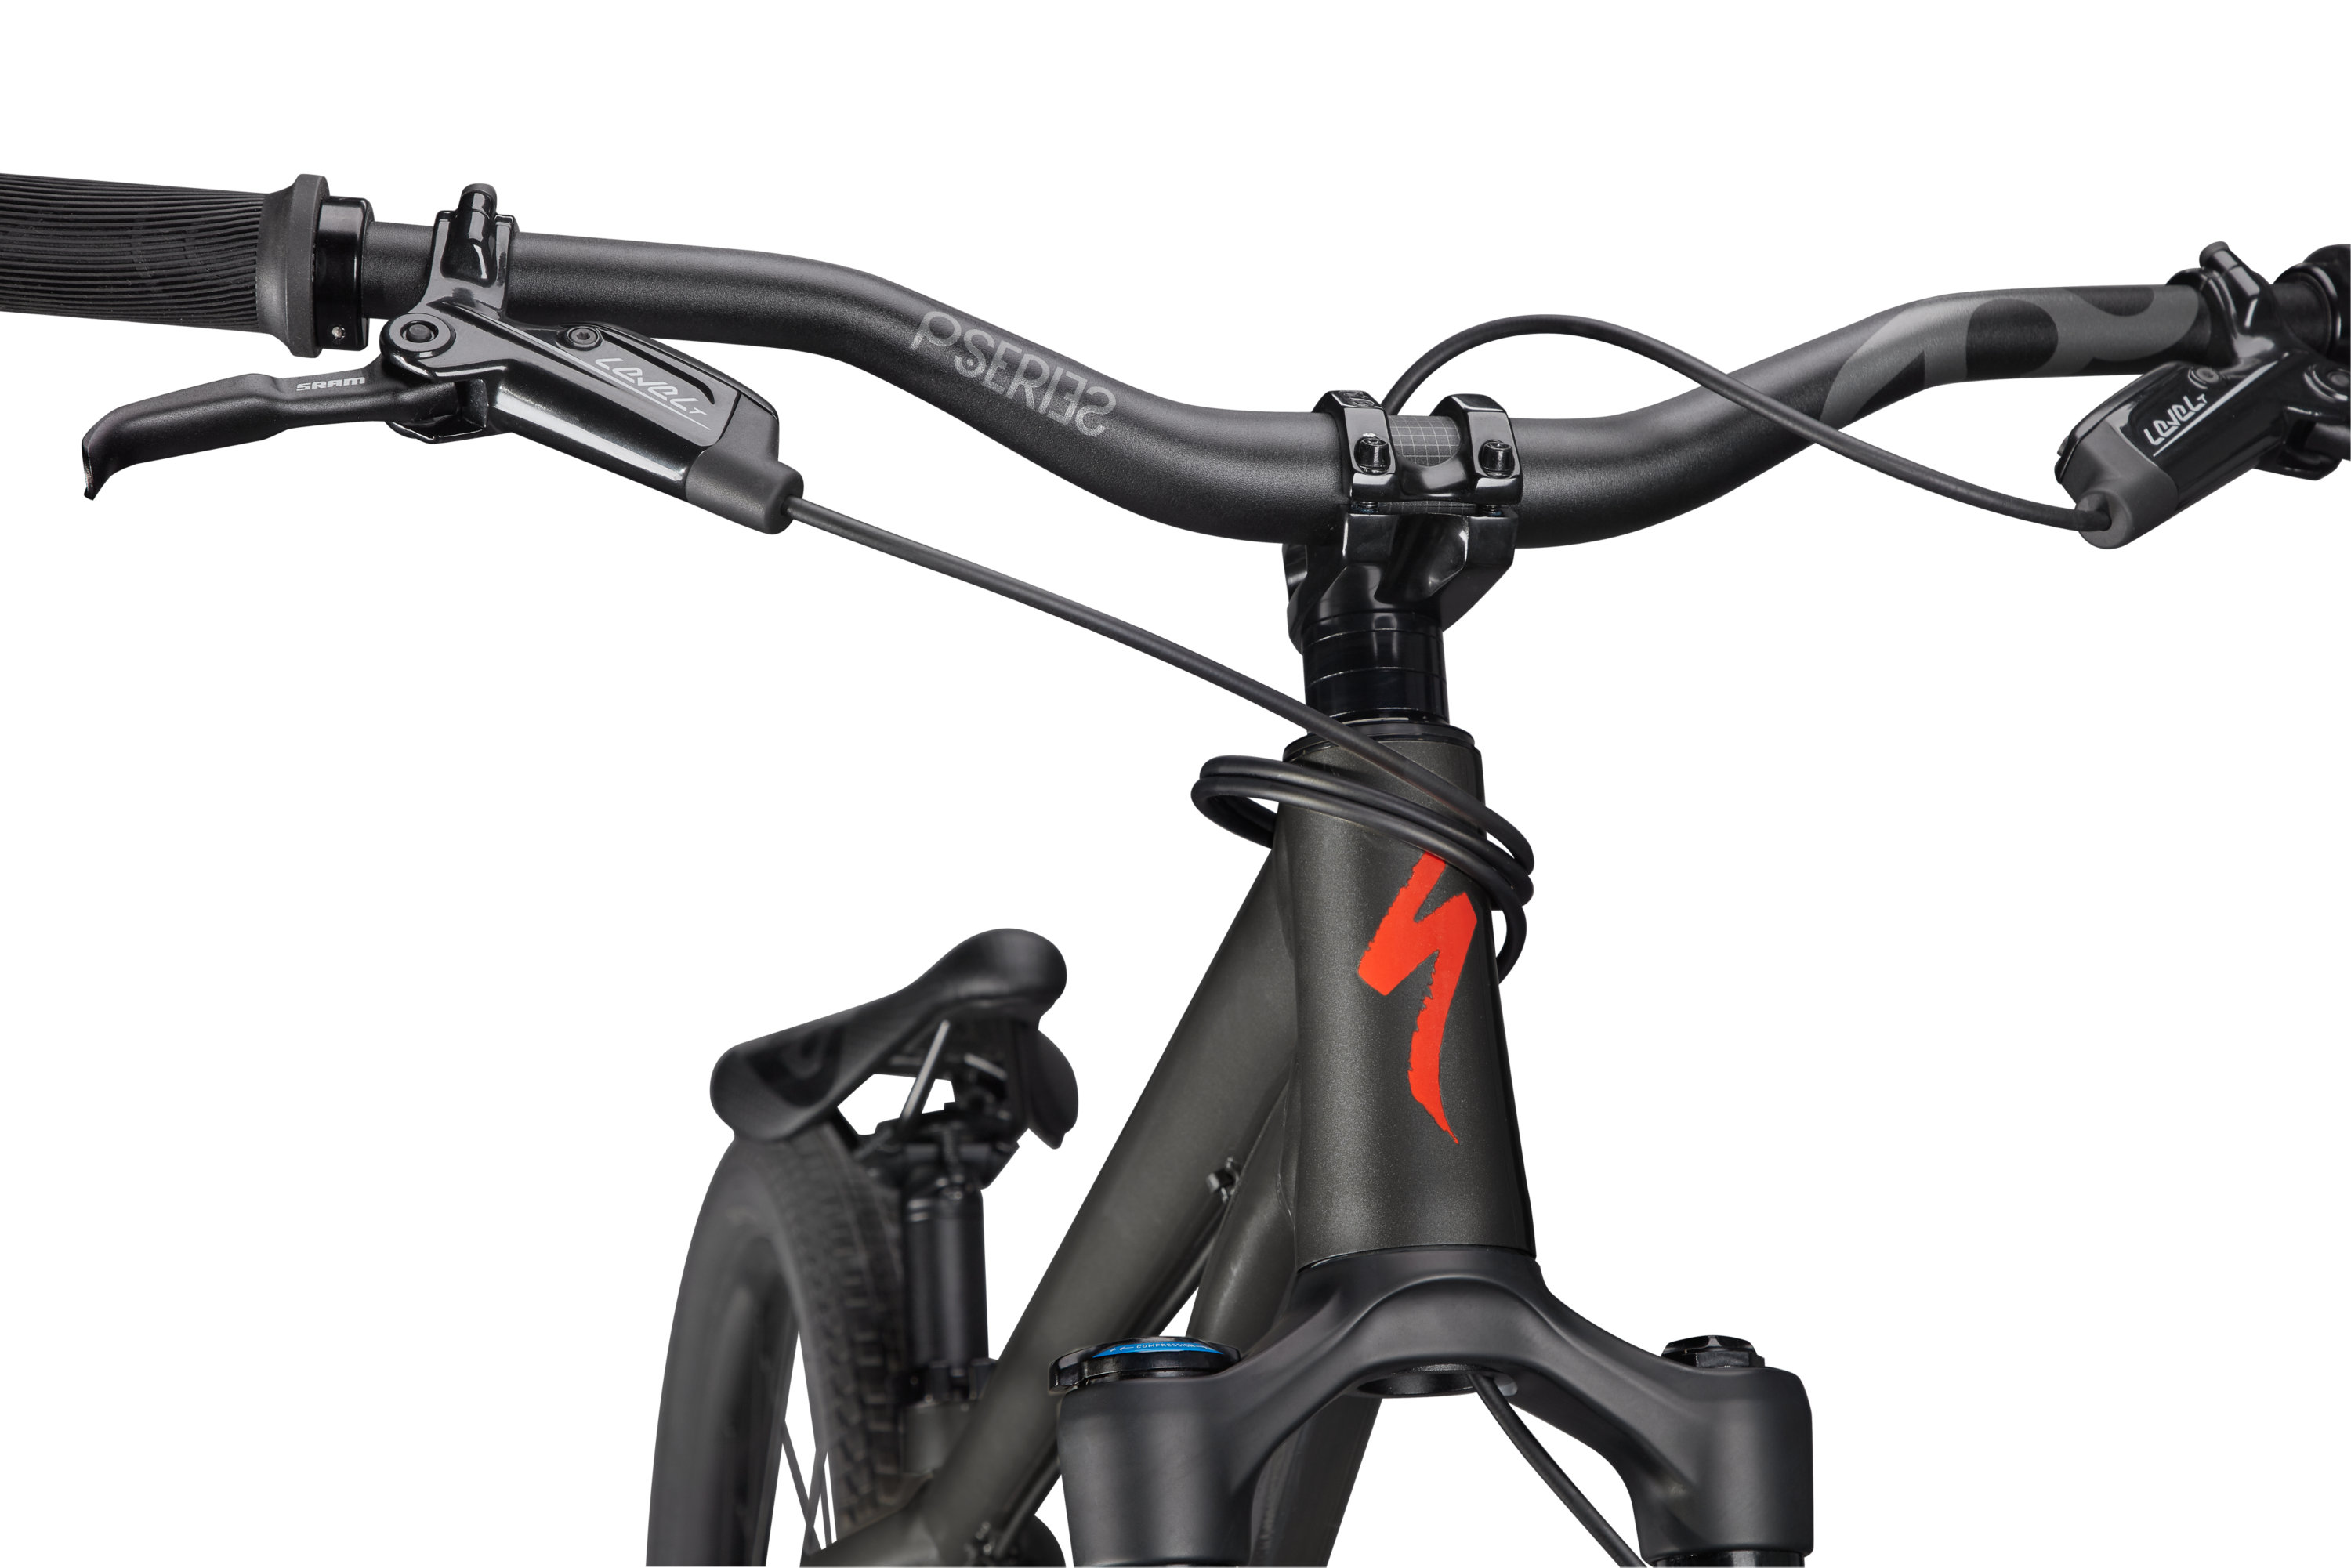 2020 specialized p3 dirt jumper